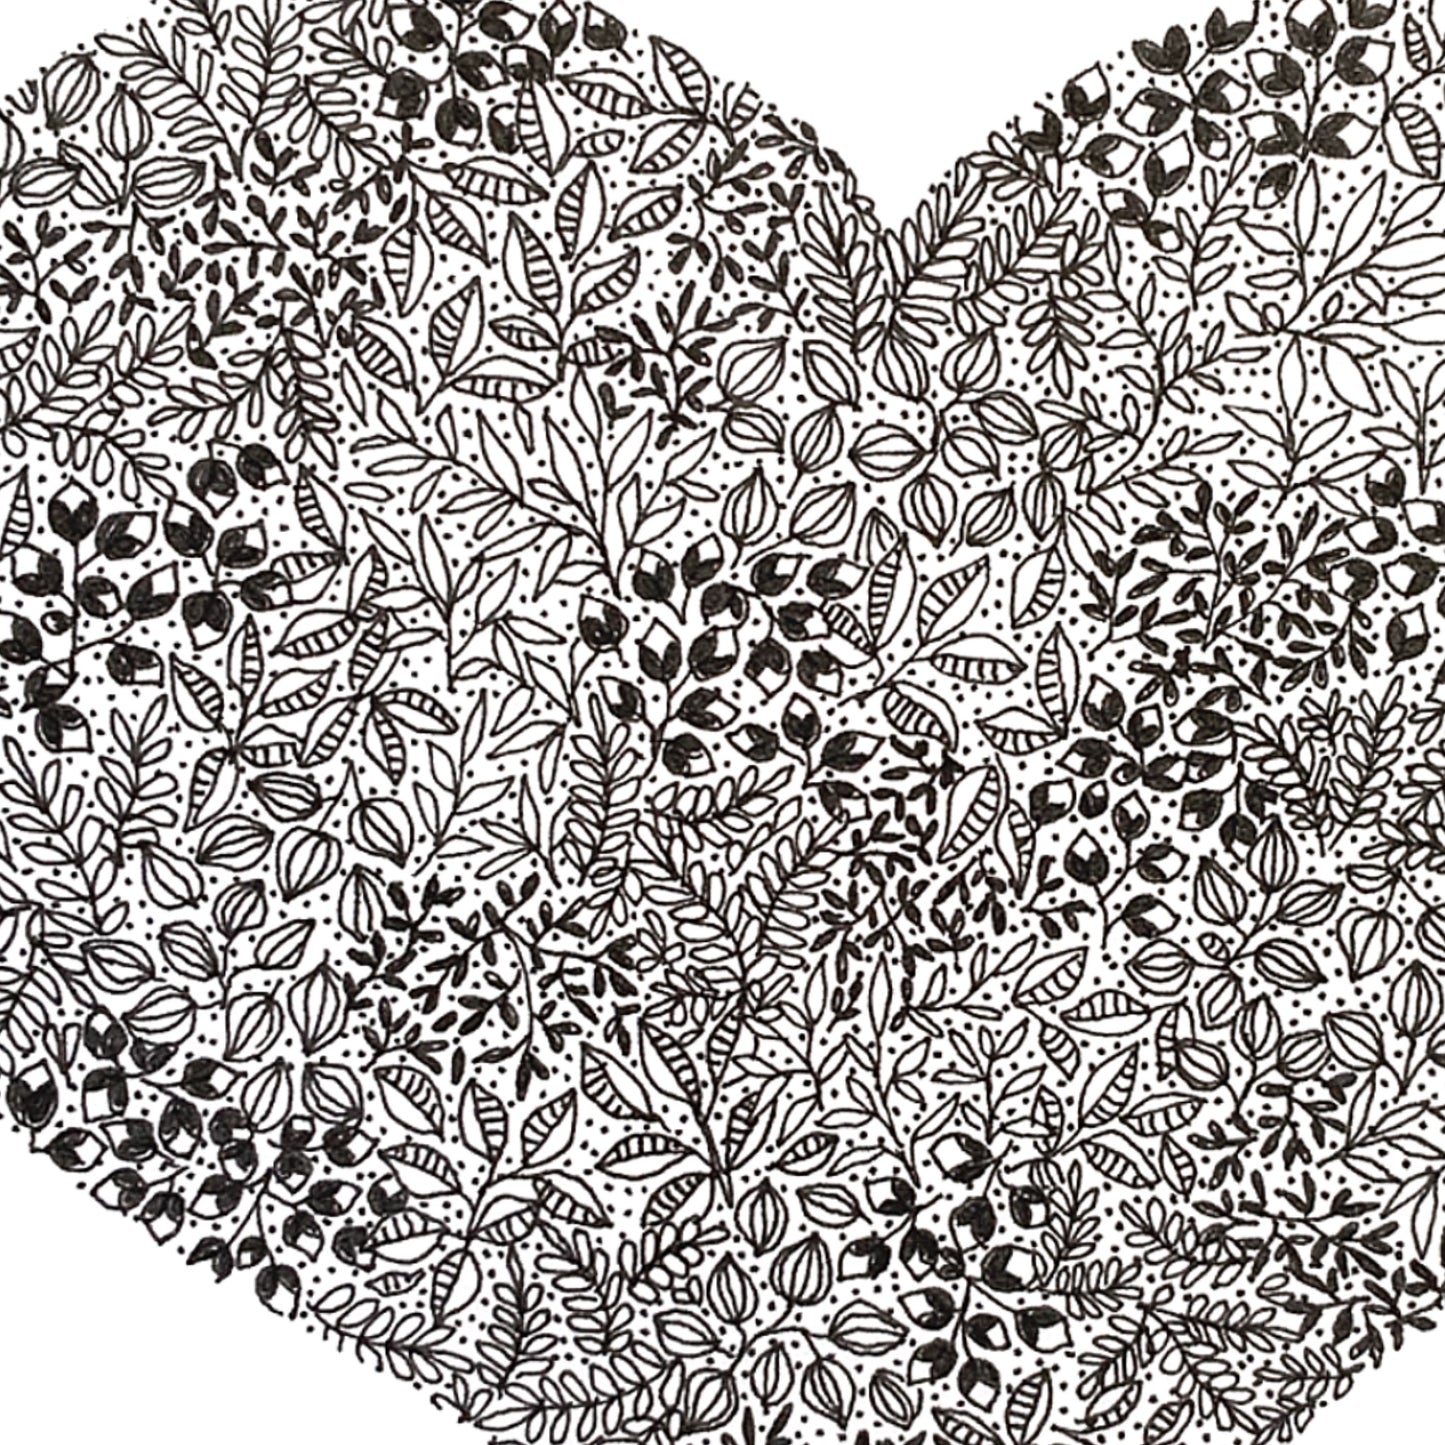 image shows close up of the Heart drawing in great detail displaying the black and white floral drawings and design. 